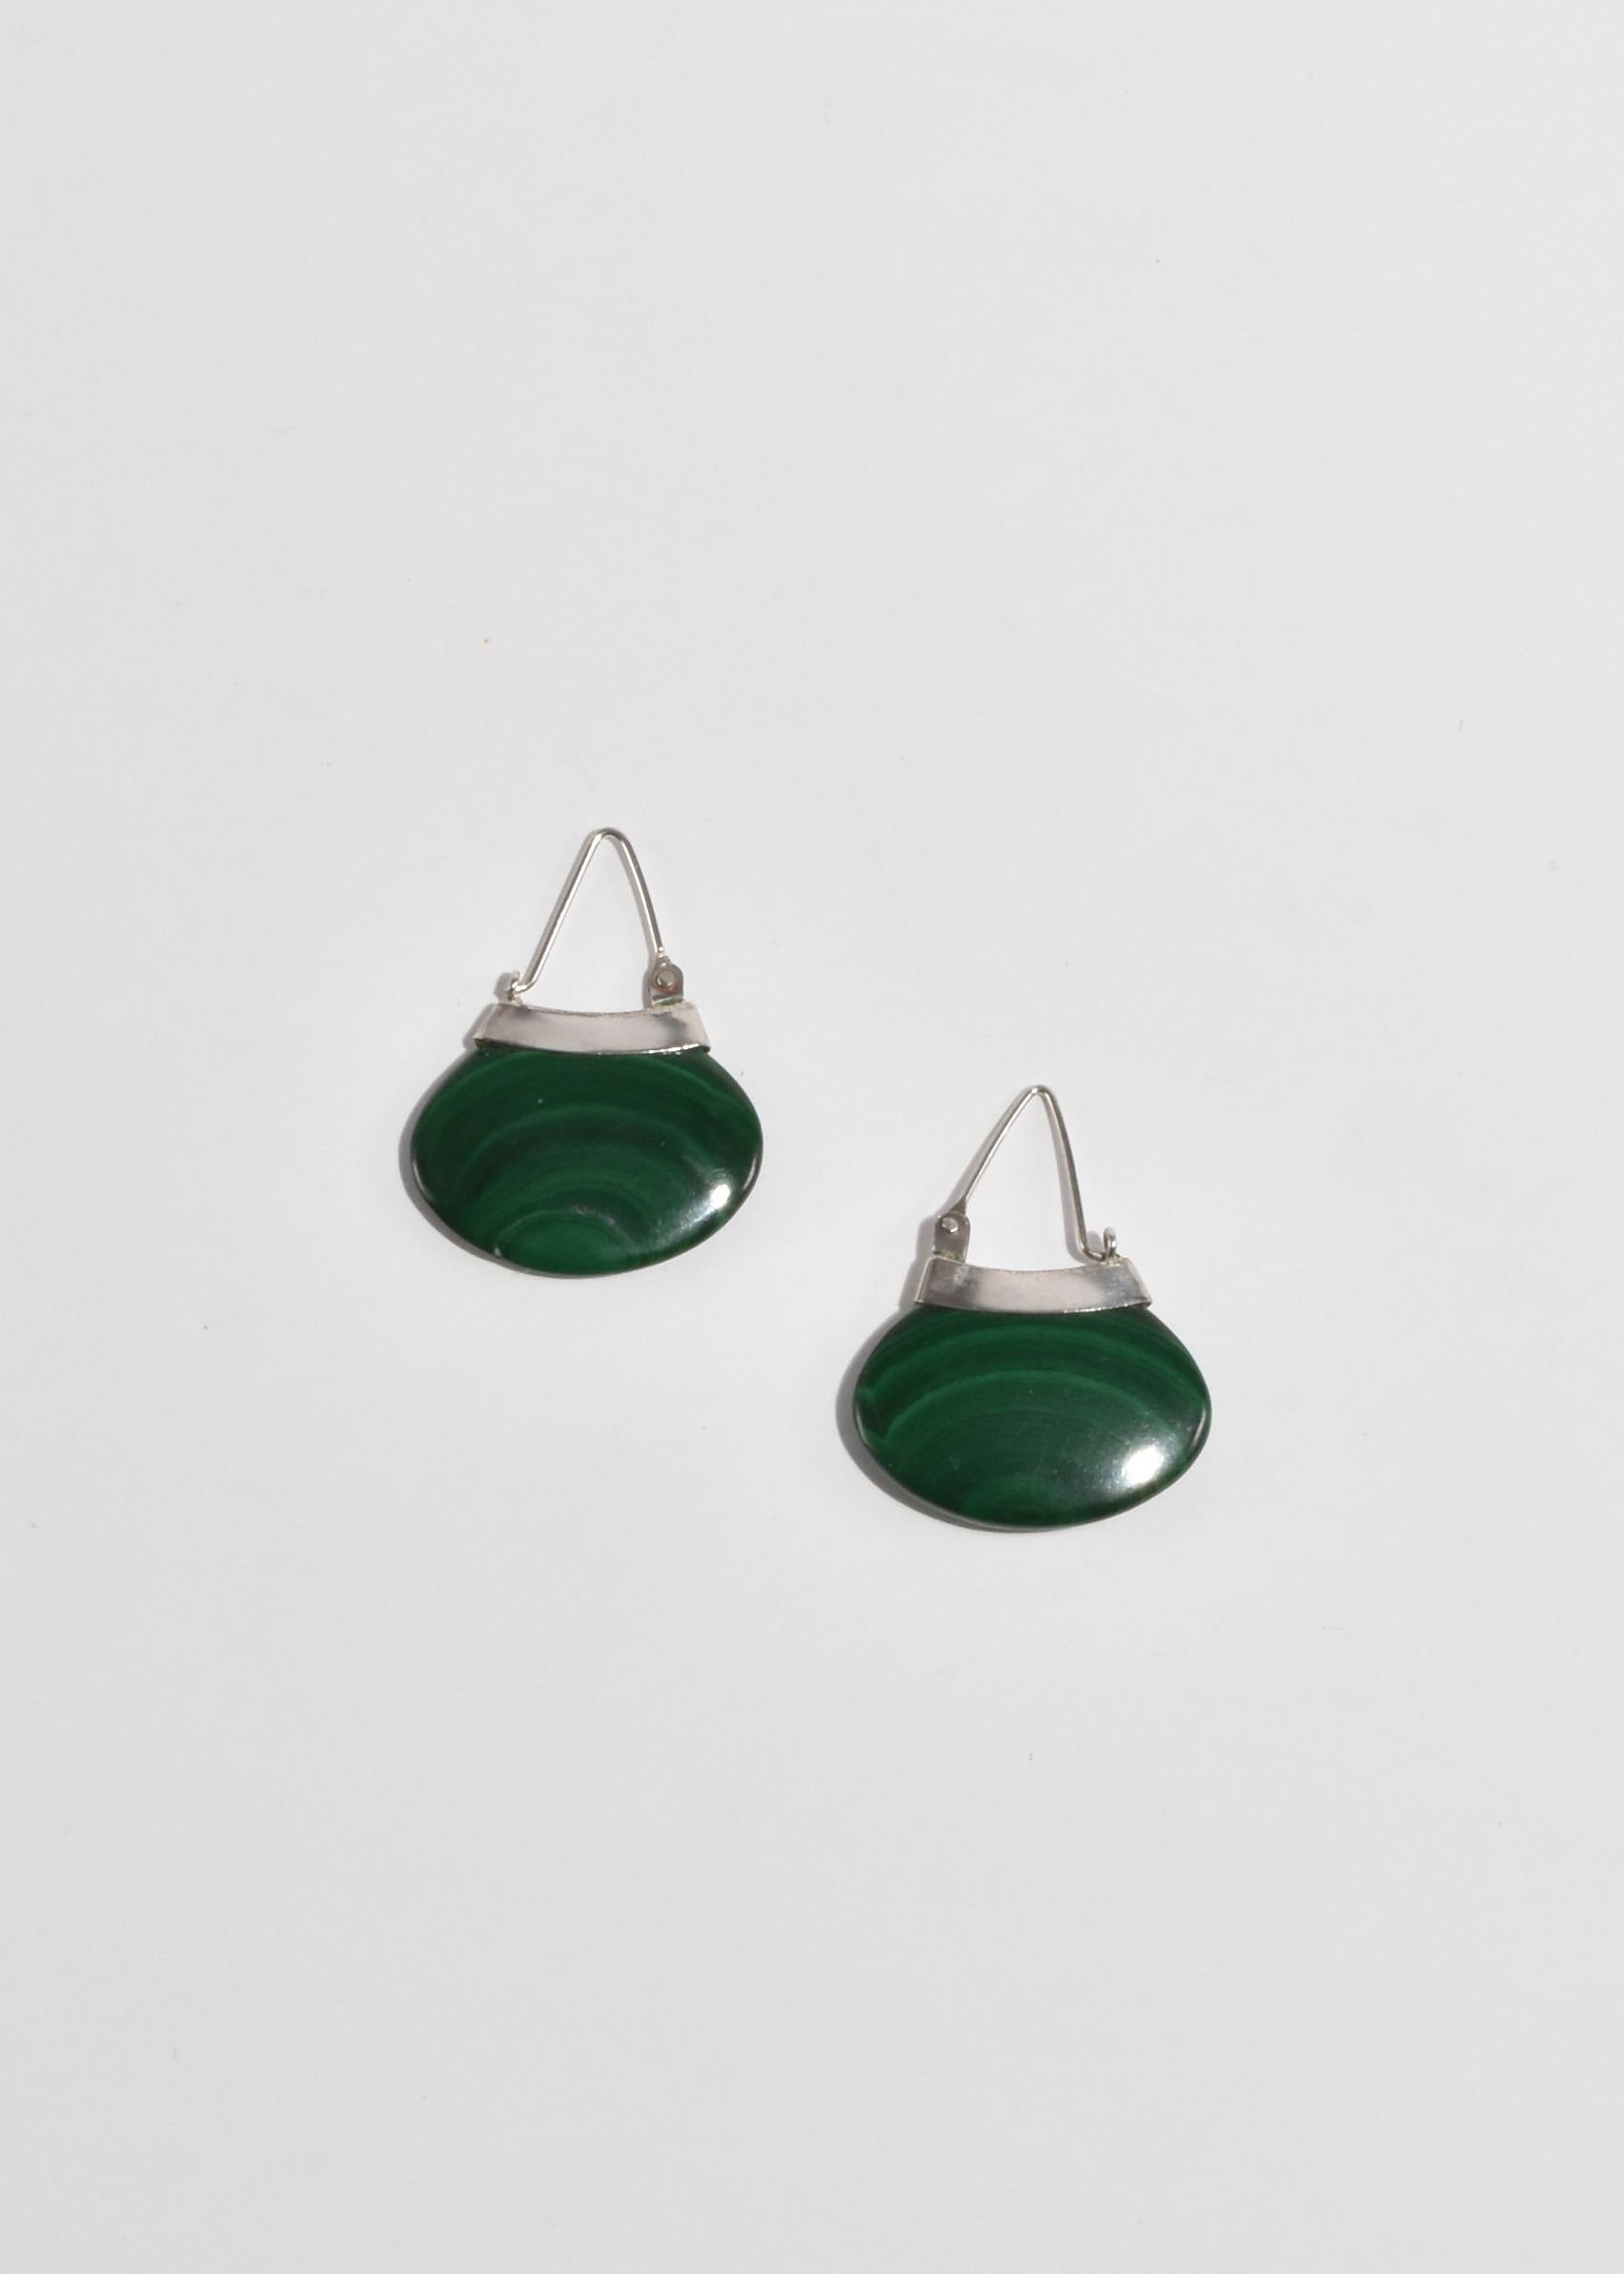 Vintage silver hoop earrings with polished malachite detail, hook and eye closure. 

Material: Sterling silver, malachite.